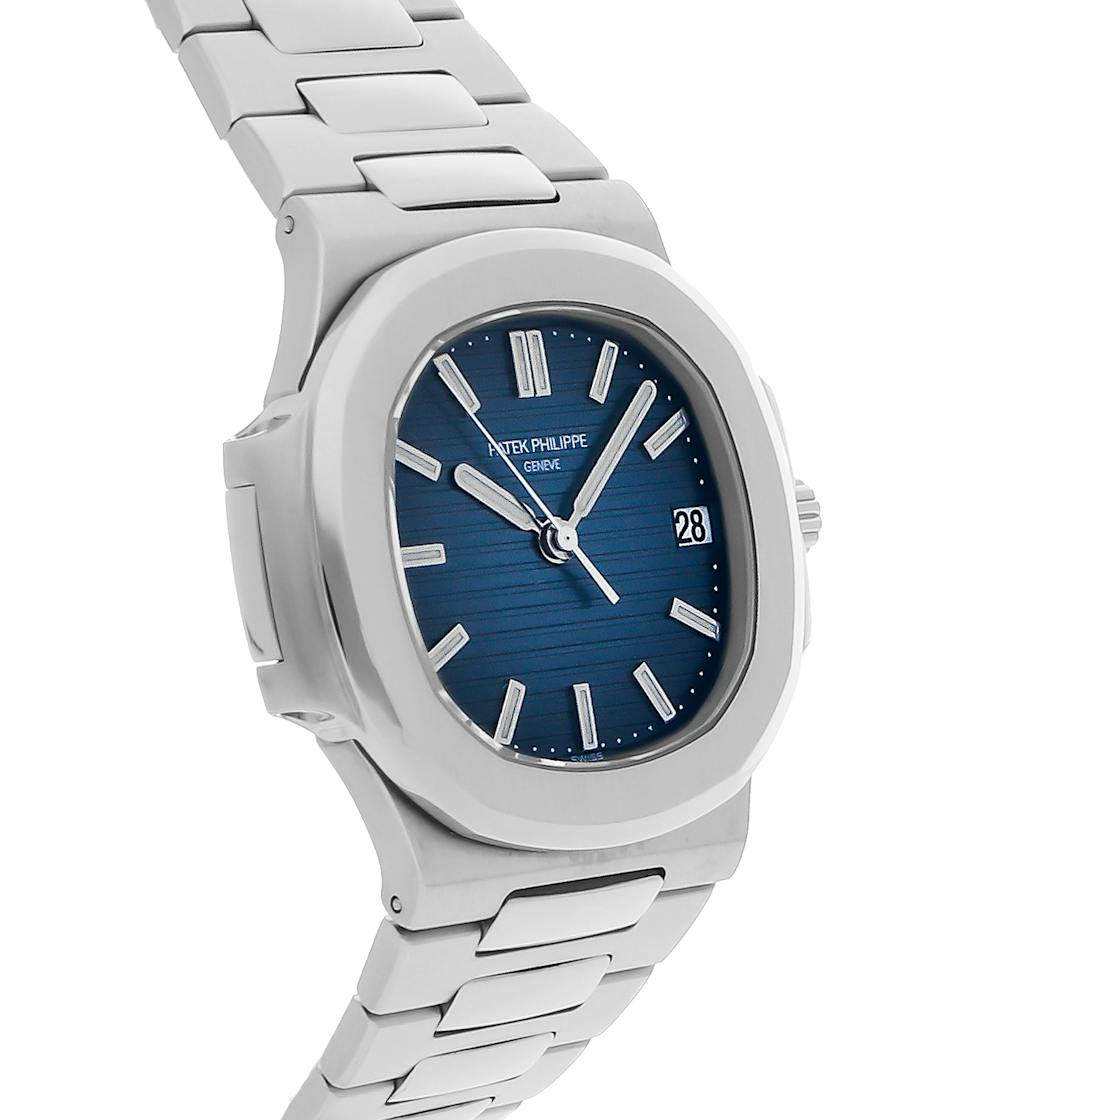 SOLD OUT: Patek Philippe Nautilus Blue Stainless Steel Bracelet 38mm 5